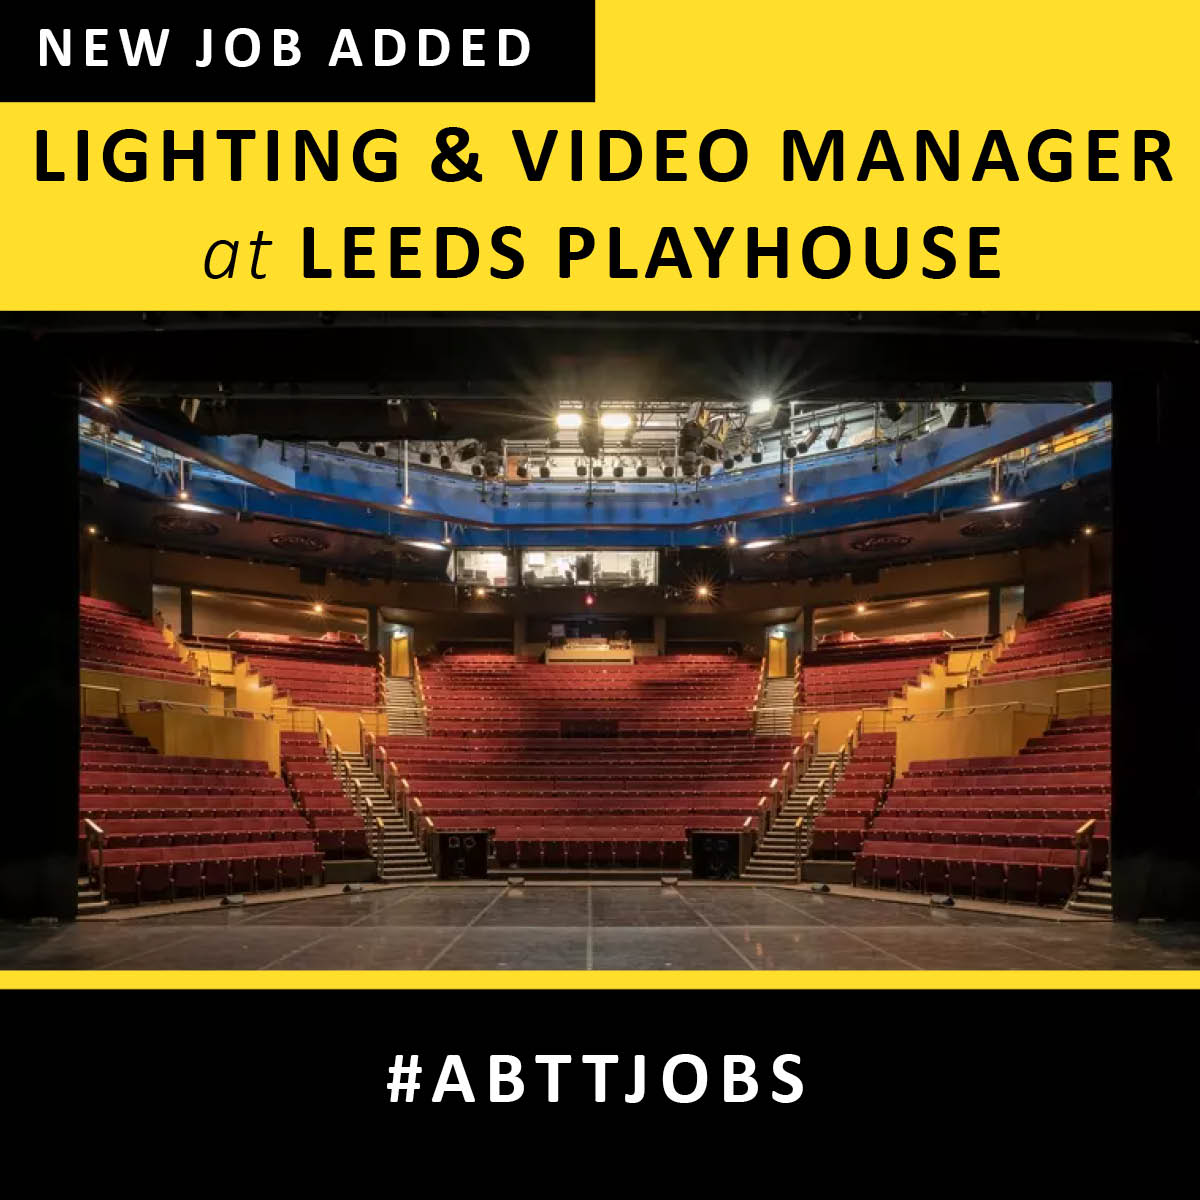 Leeds Playhouse are recruiting for a skilled individual with proven experience of managing lighting and video within the events and entertainment industry, to join them in the role of Lighting & Video Manager.

Find out more and apply here: abtt.org.uk/jobs/lighting-…

#ABTTjobs